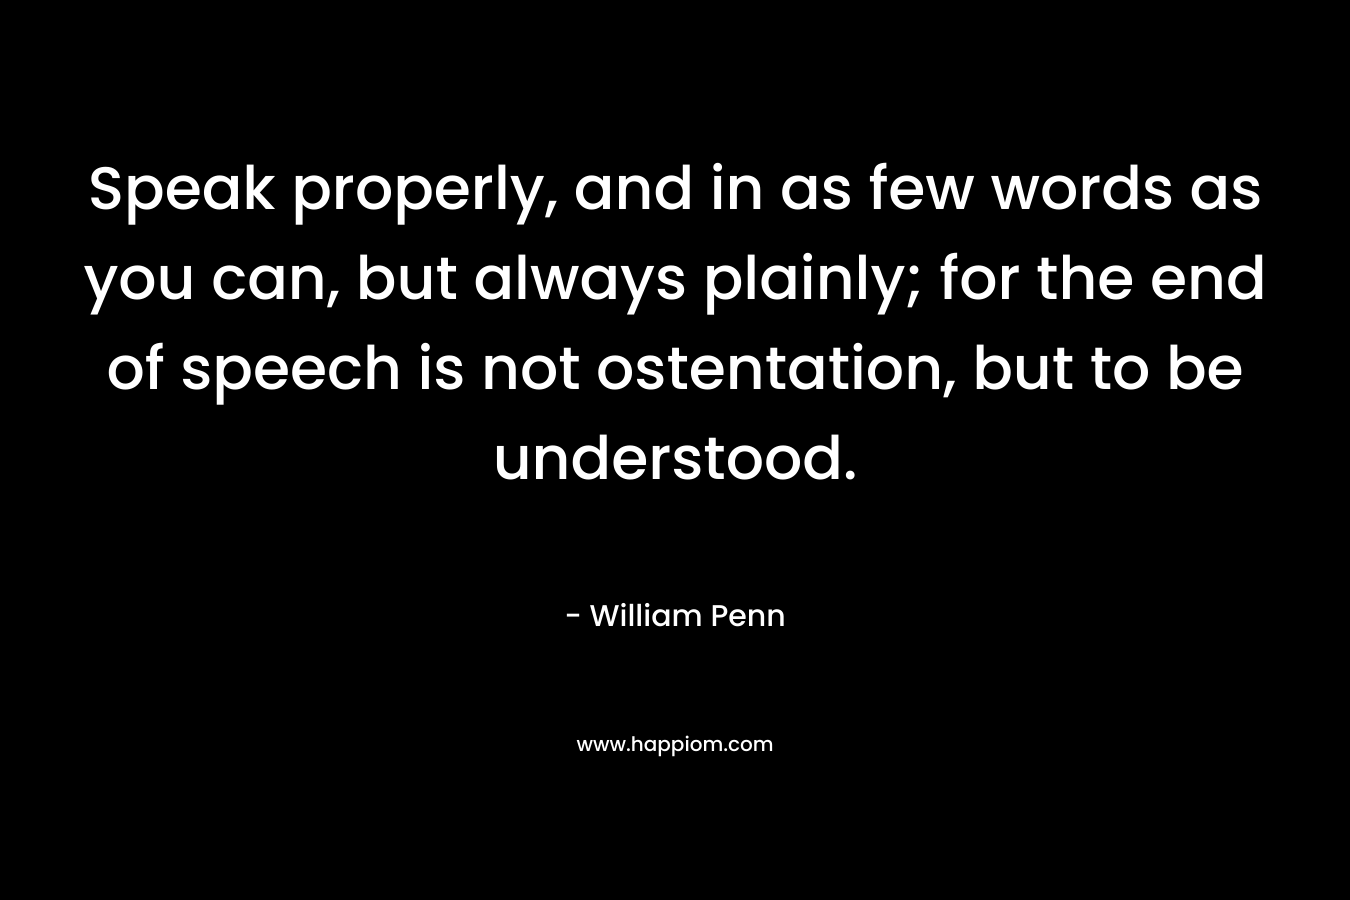 Speak properly, and in as few words as you can, but always plainly; for the end of speech is not ostentation, but to be understood. – William Penn